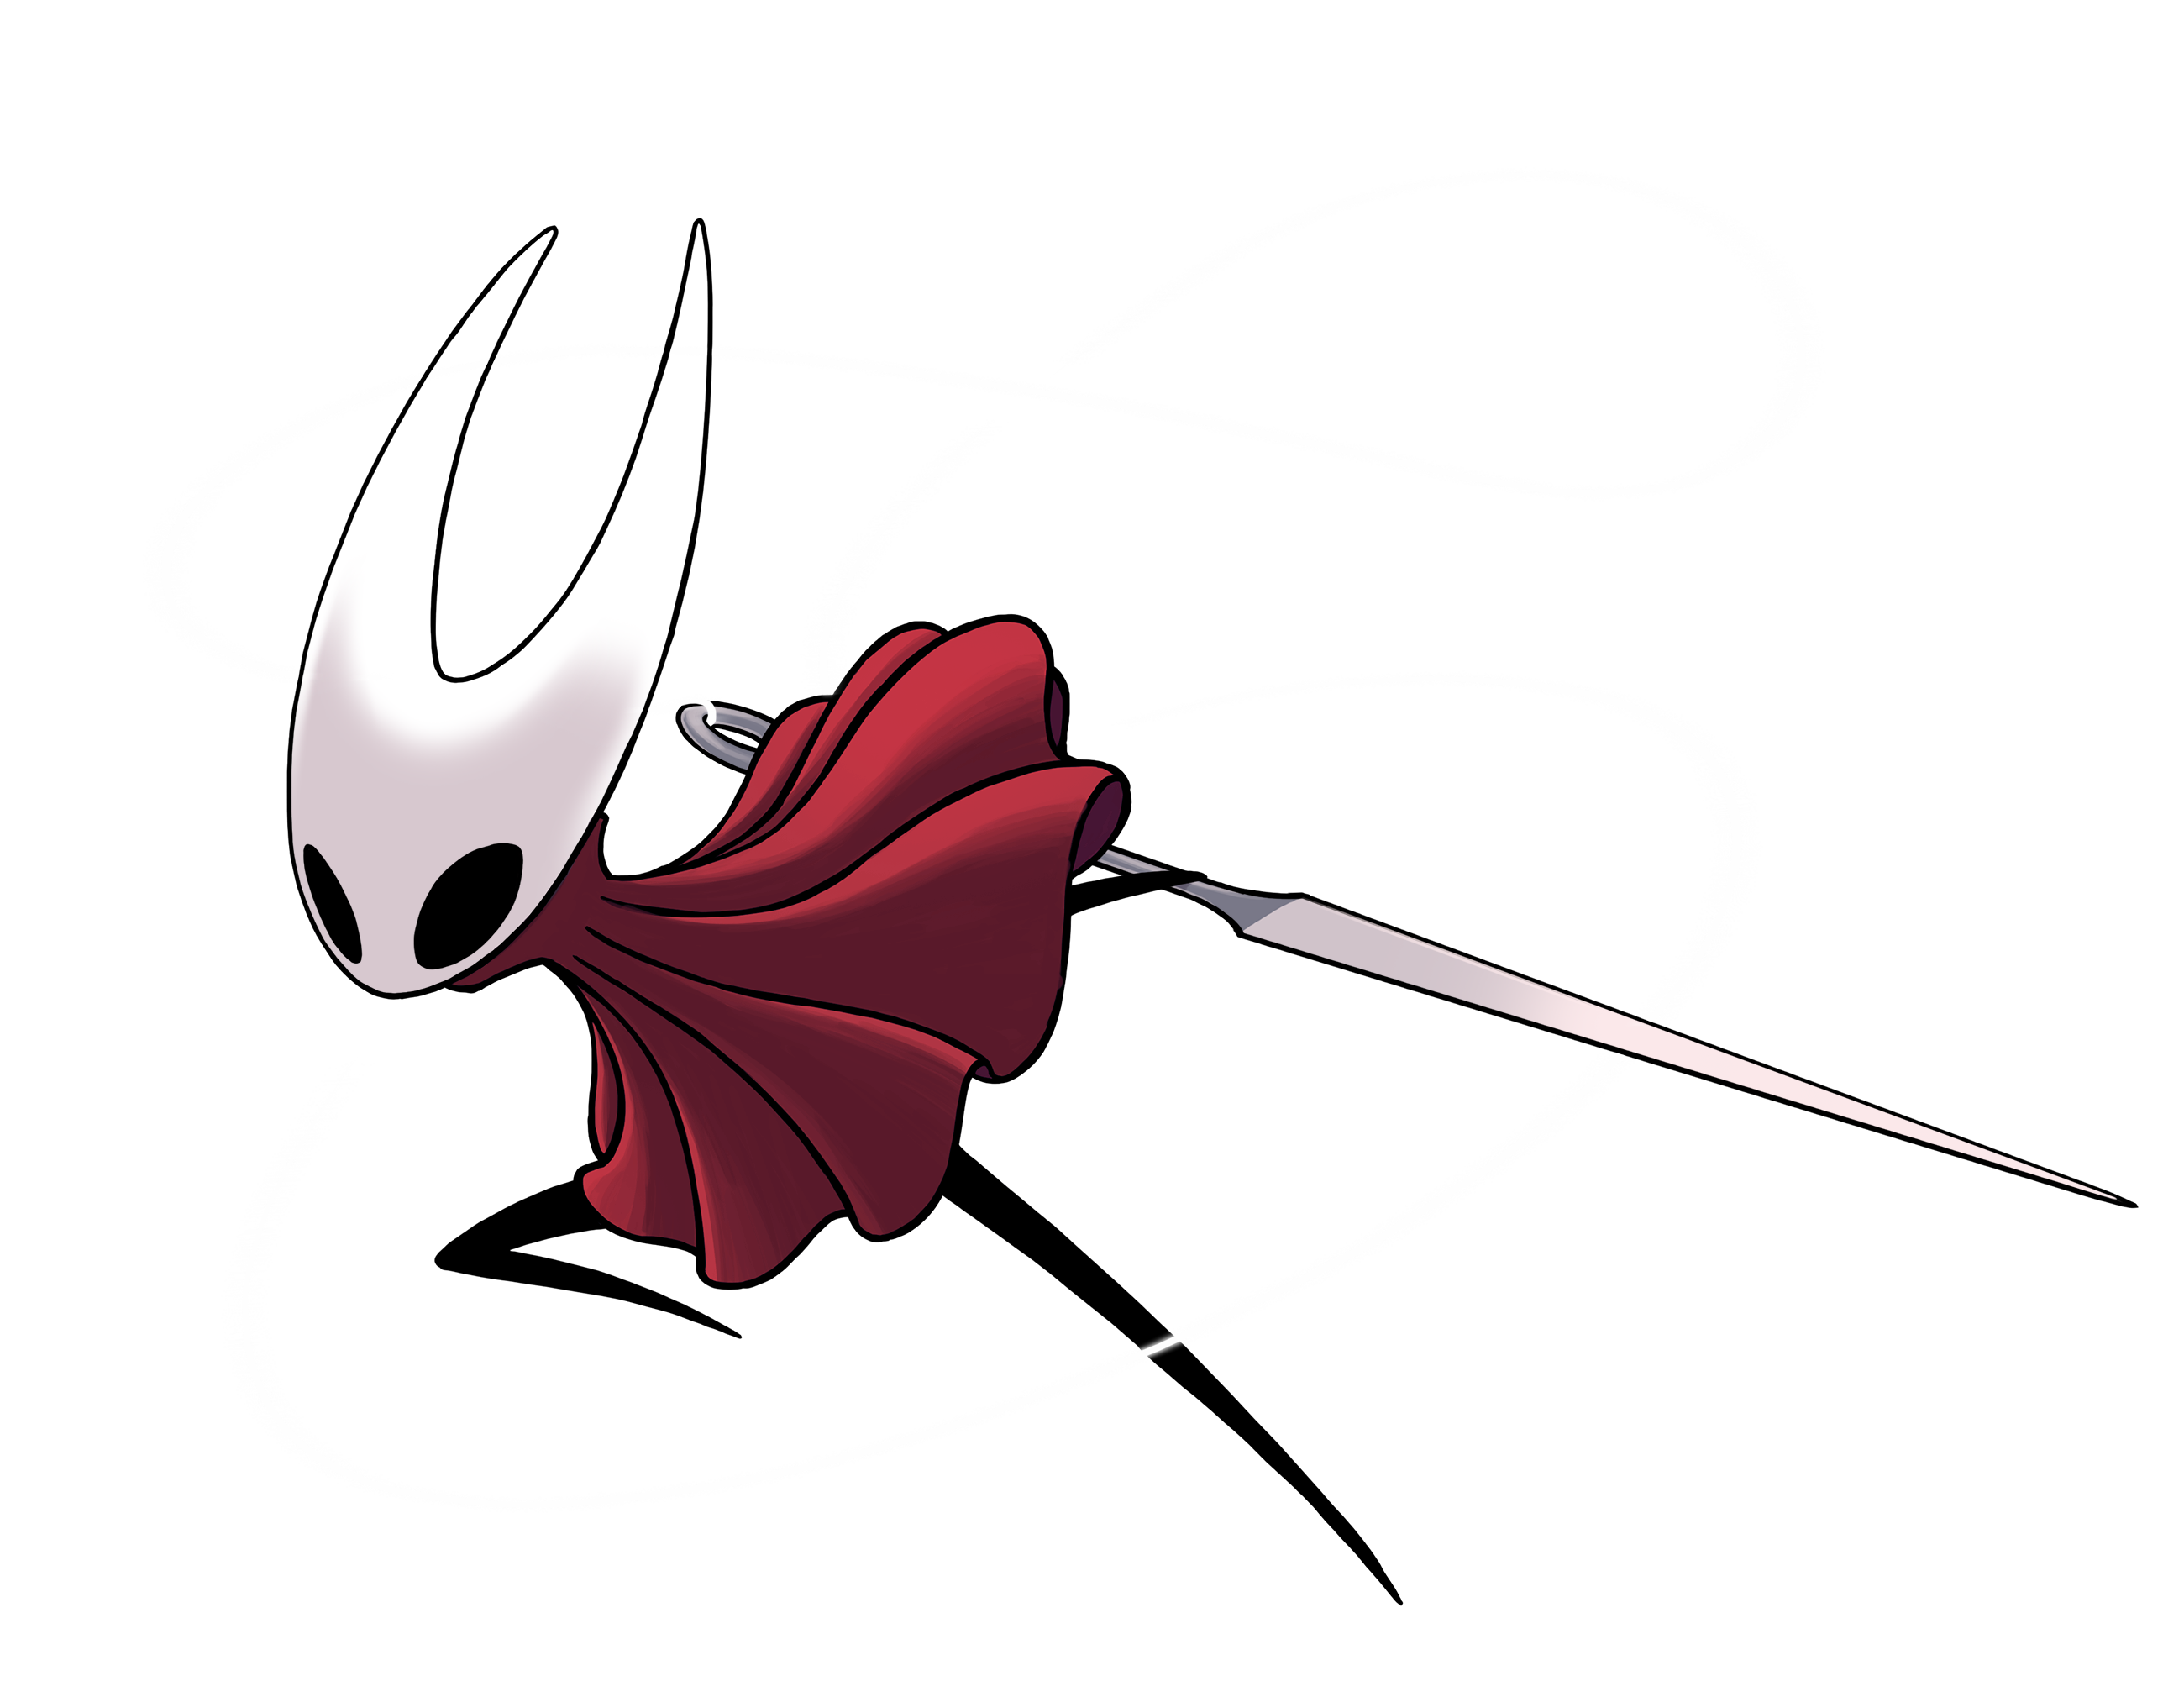 hollow knight wallpaper hornet and knight